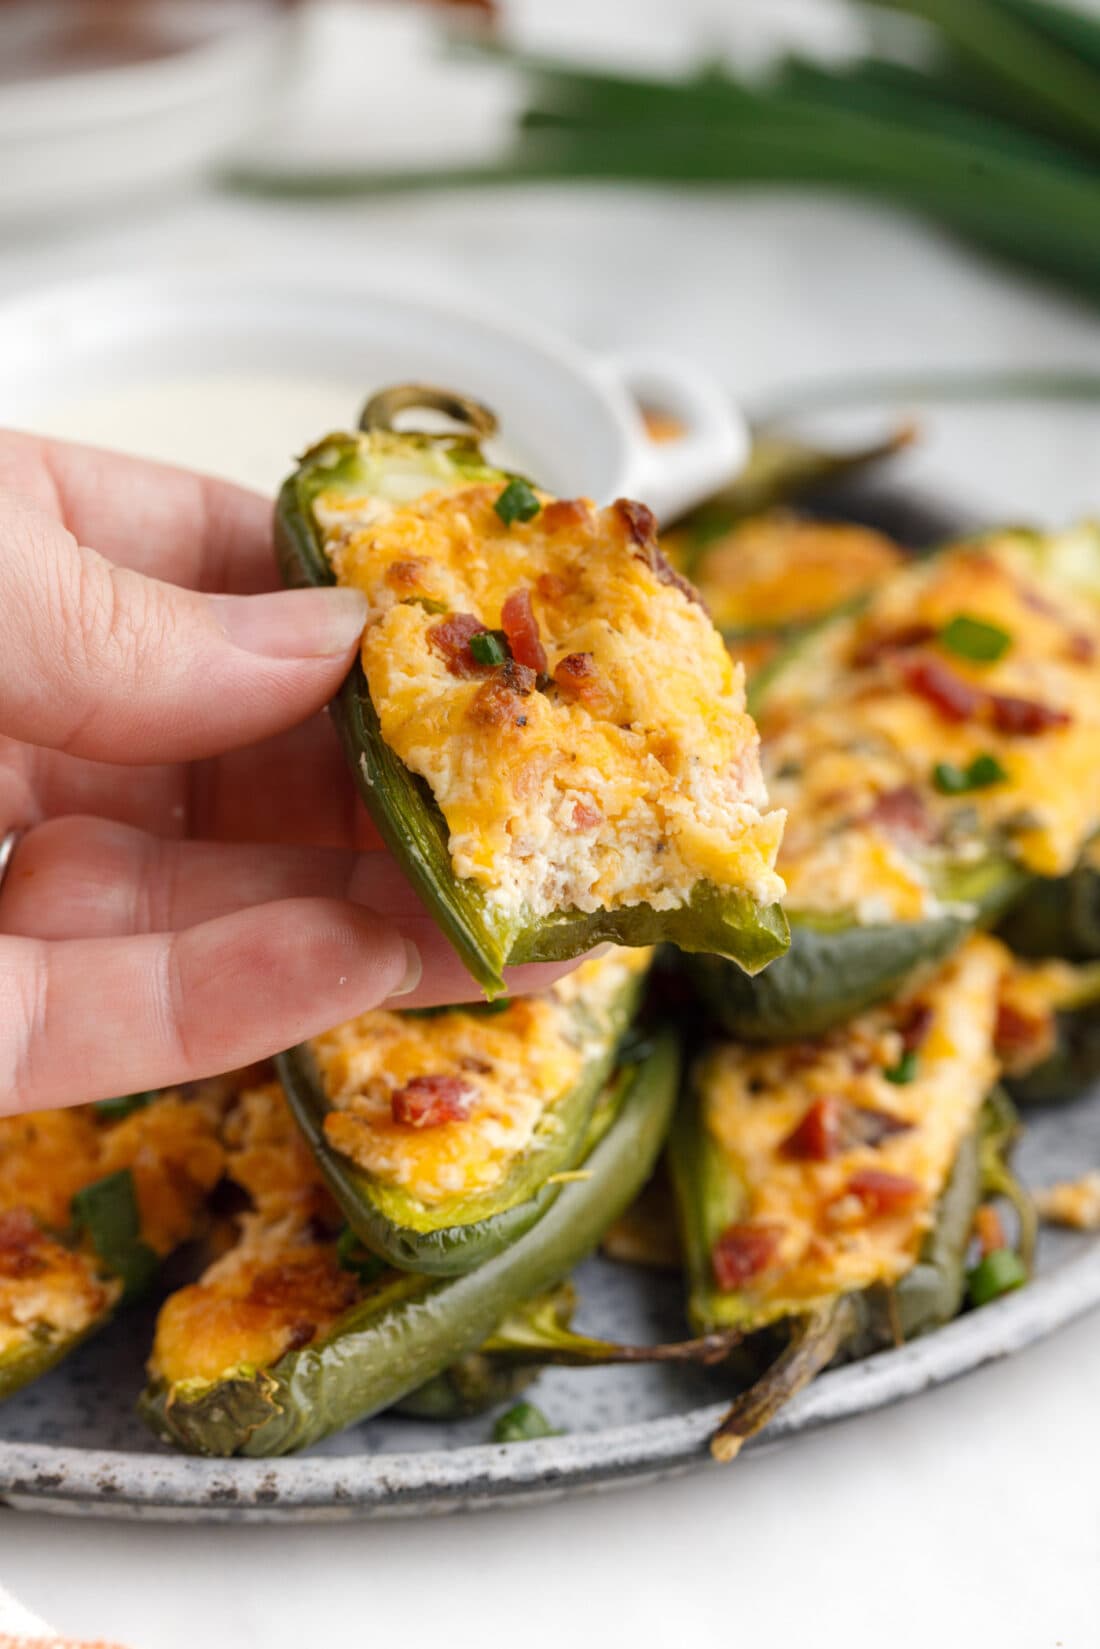 Jalapeno Popper with a bite out of it